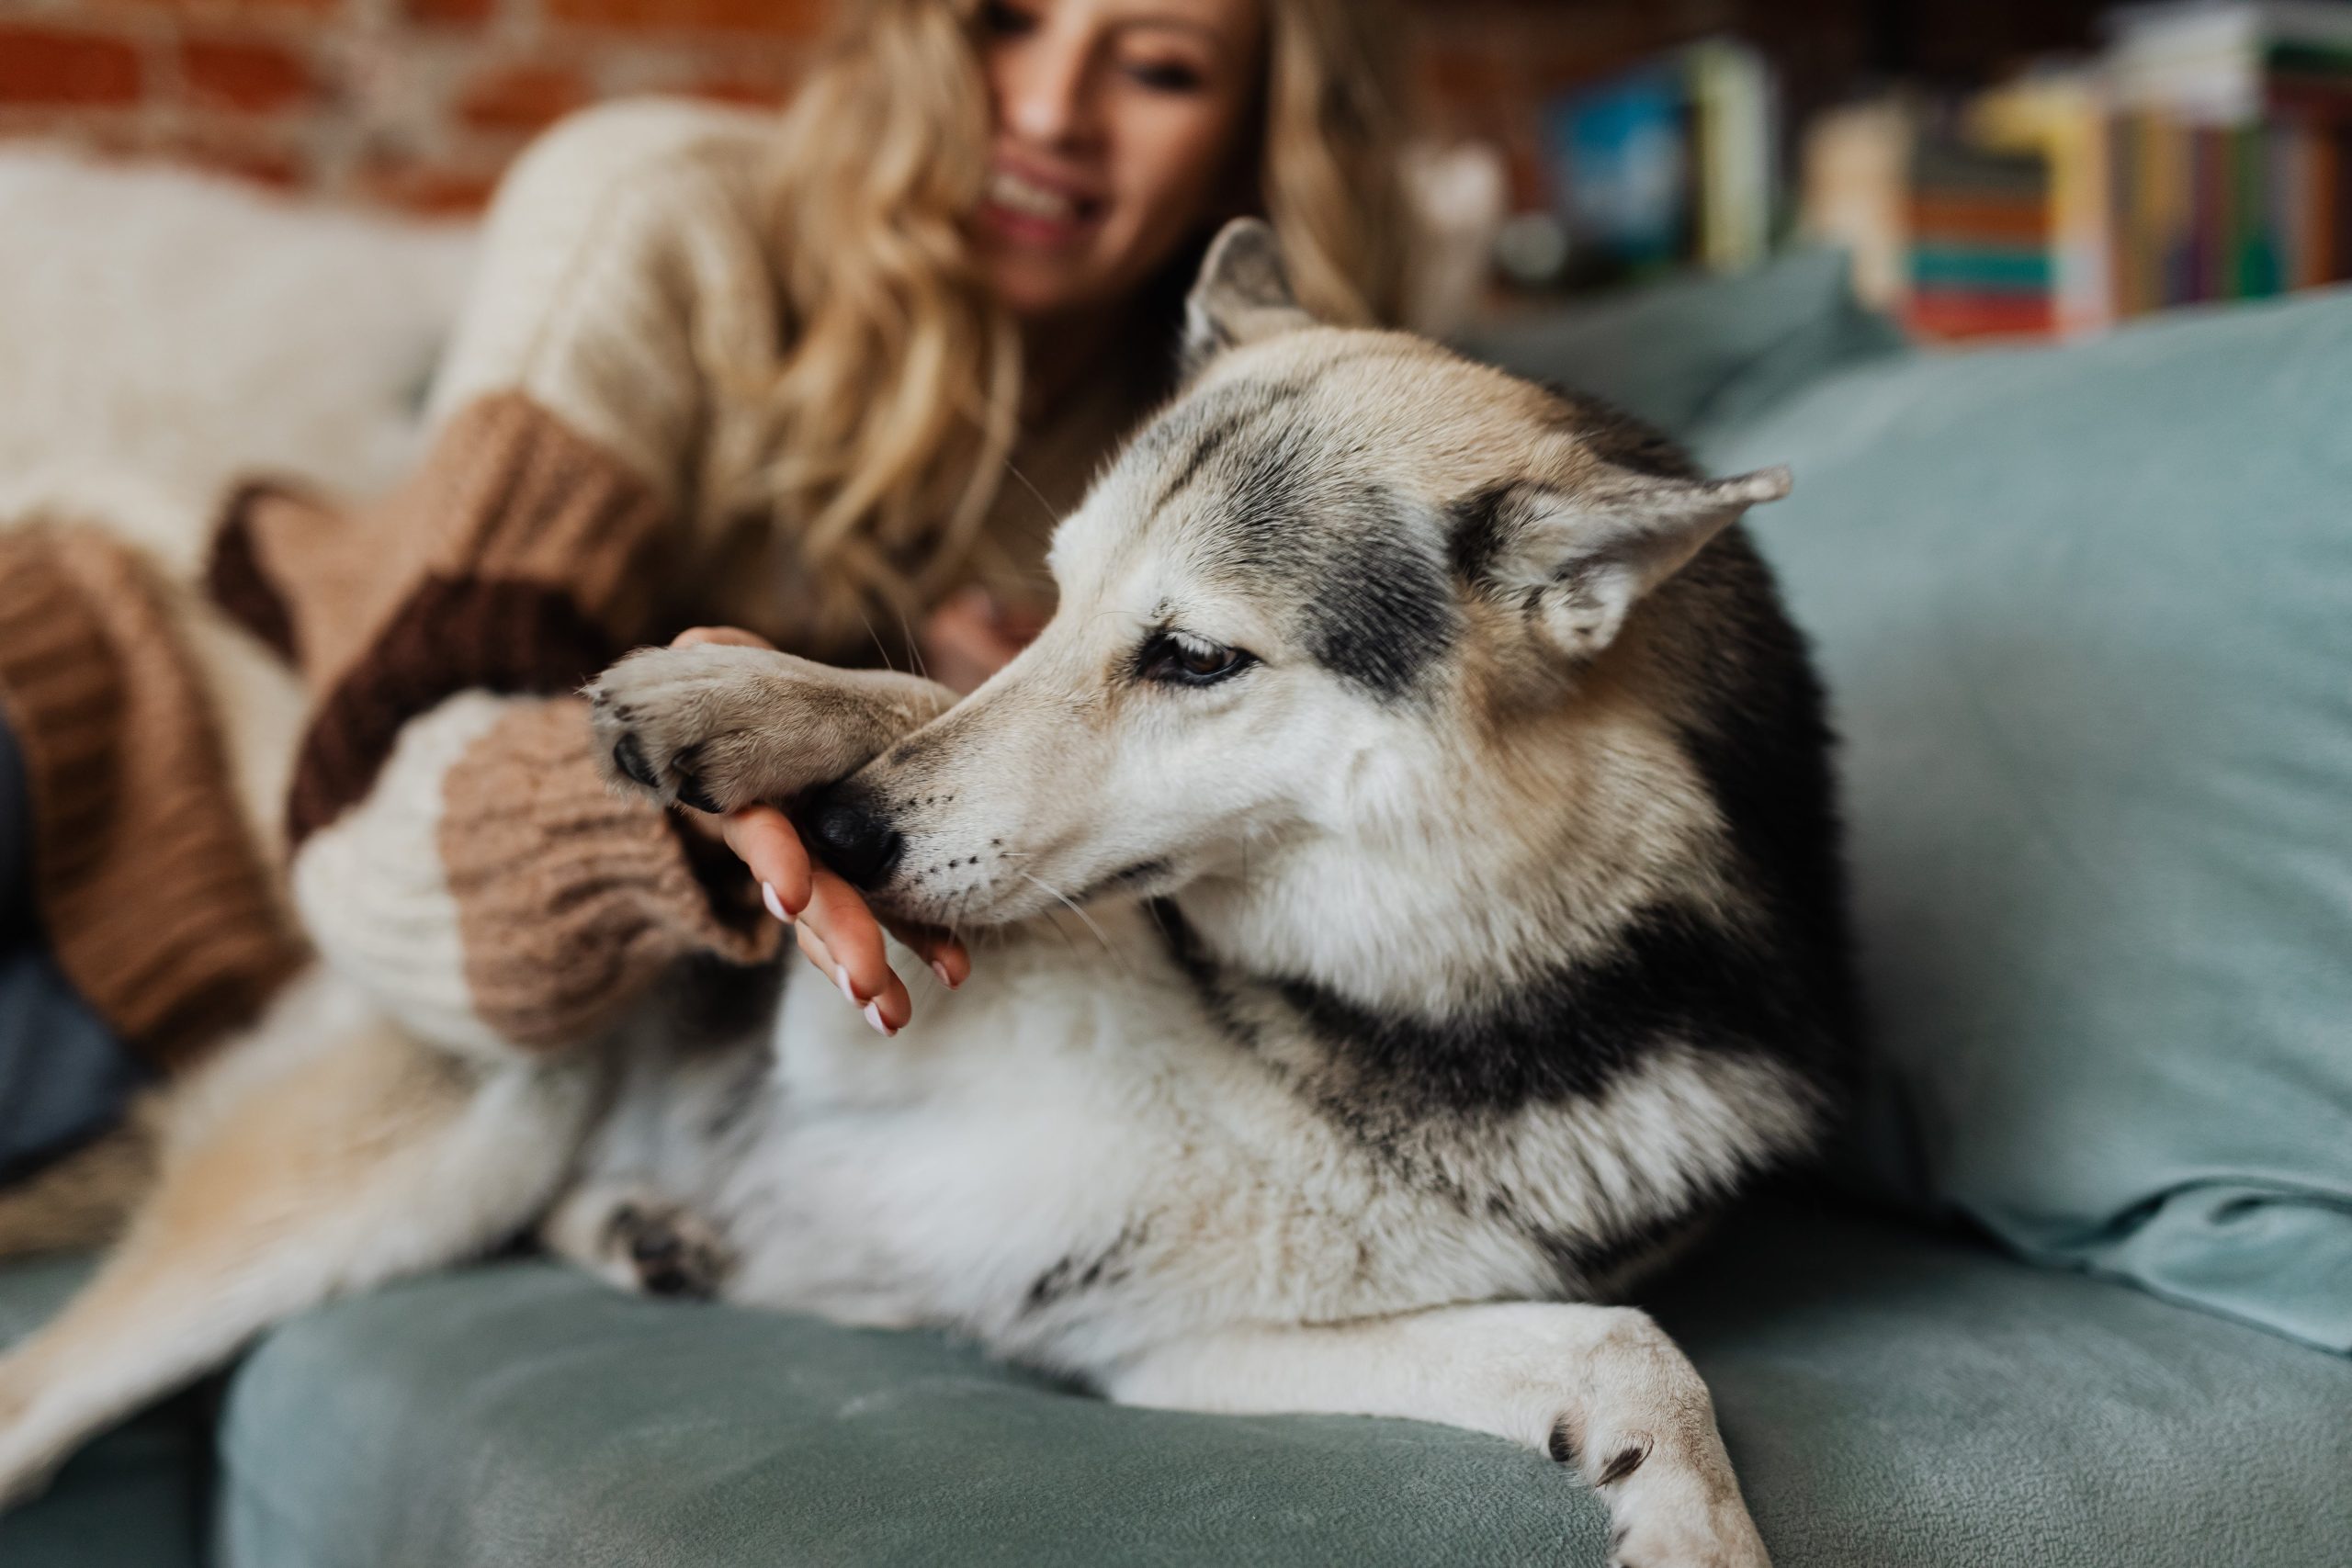 Can Dogs Smell Their Owners?